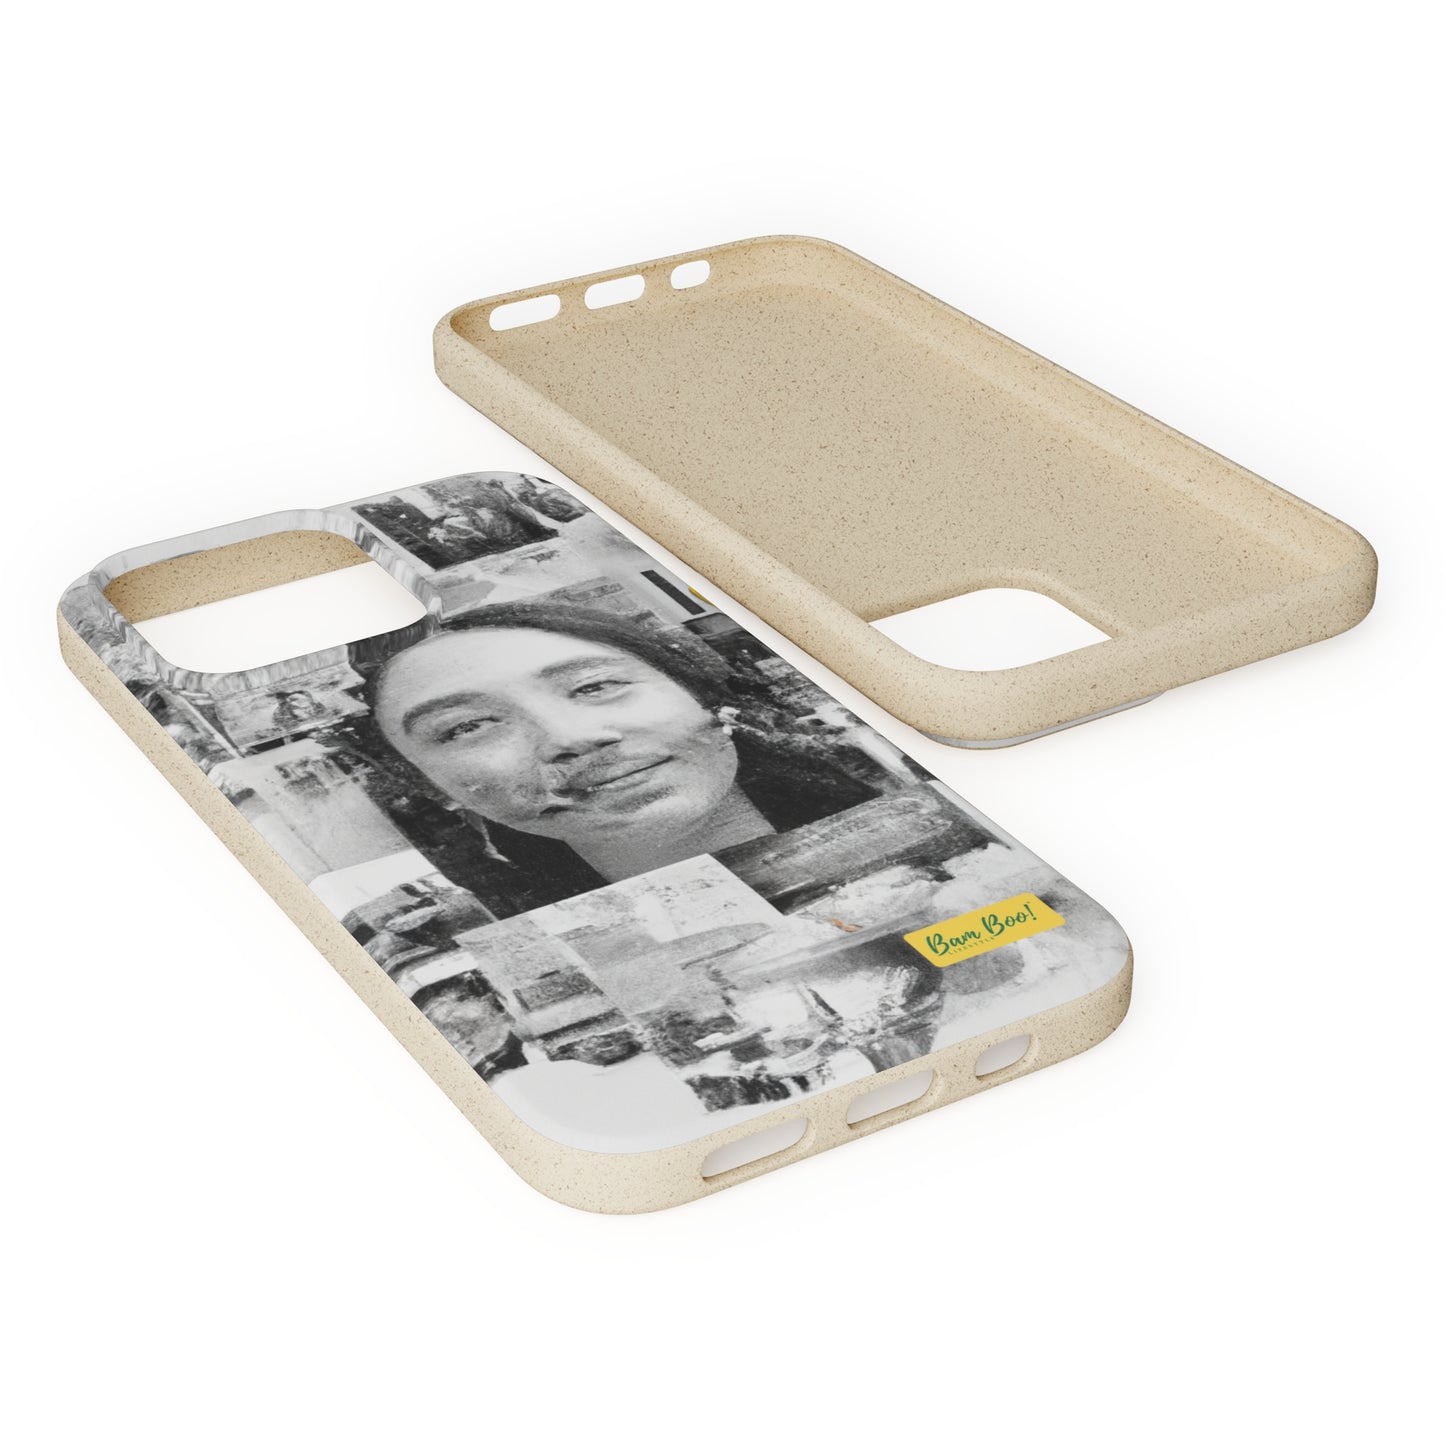 "My Life in Pictures: A Collage of My Favorite Memories" - Bam Boo! Lifestyle Eco-friendly Cases